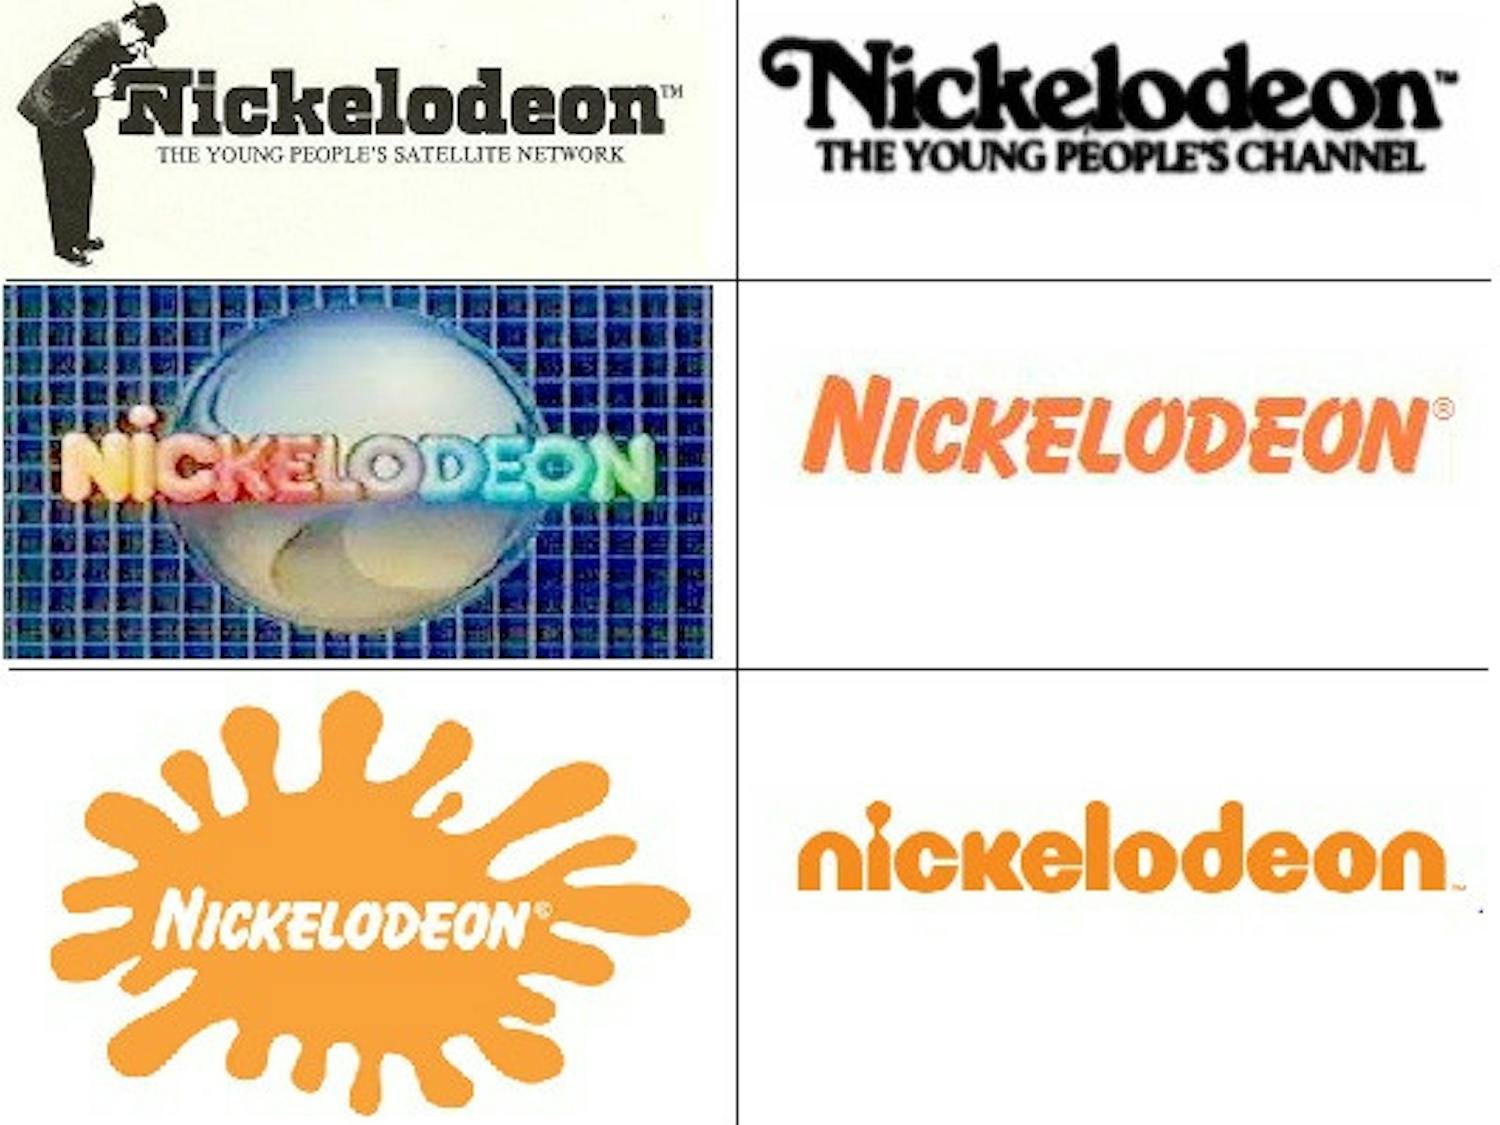 The evolution of the Nickelodeon logo, from 1979 to the present day.